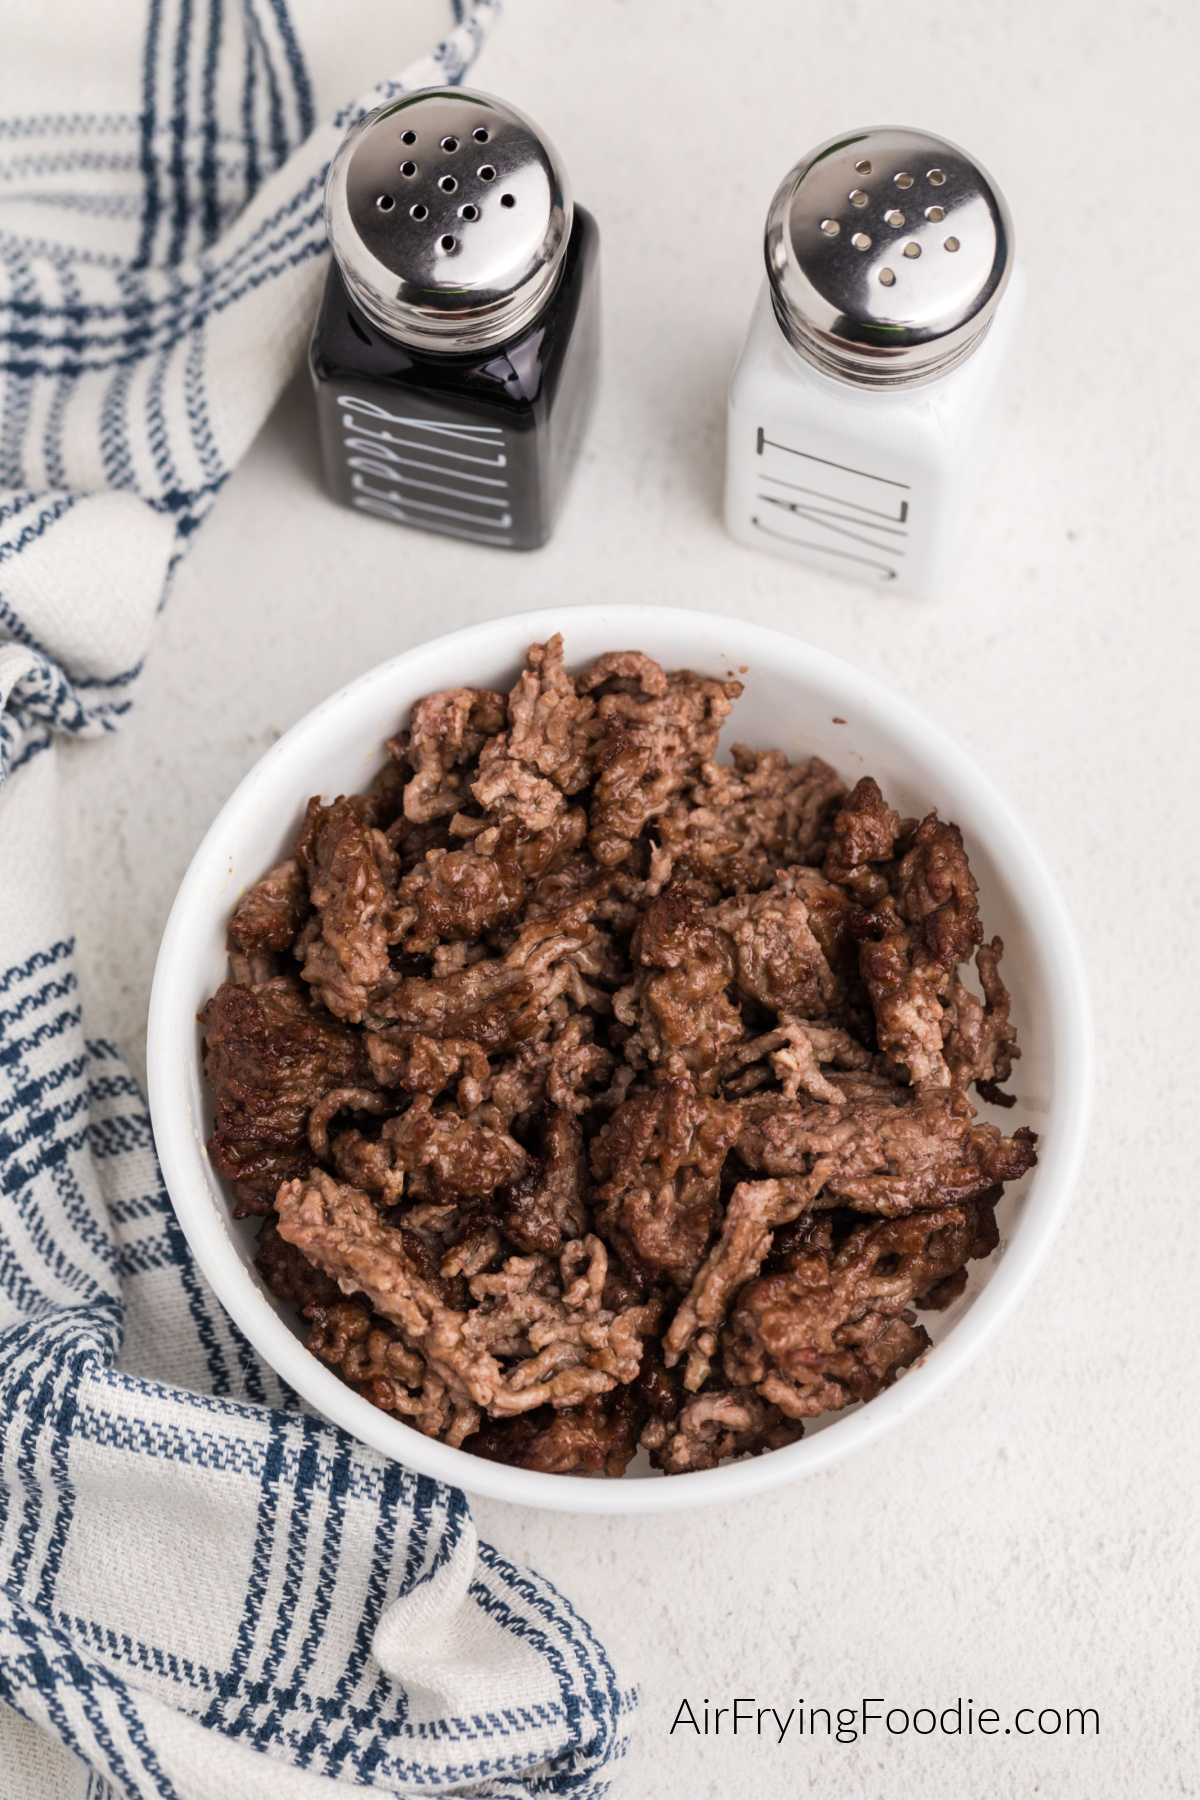 Air fried ground beef in a bowl ready to eat.
